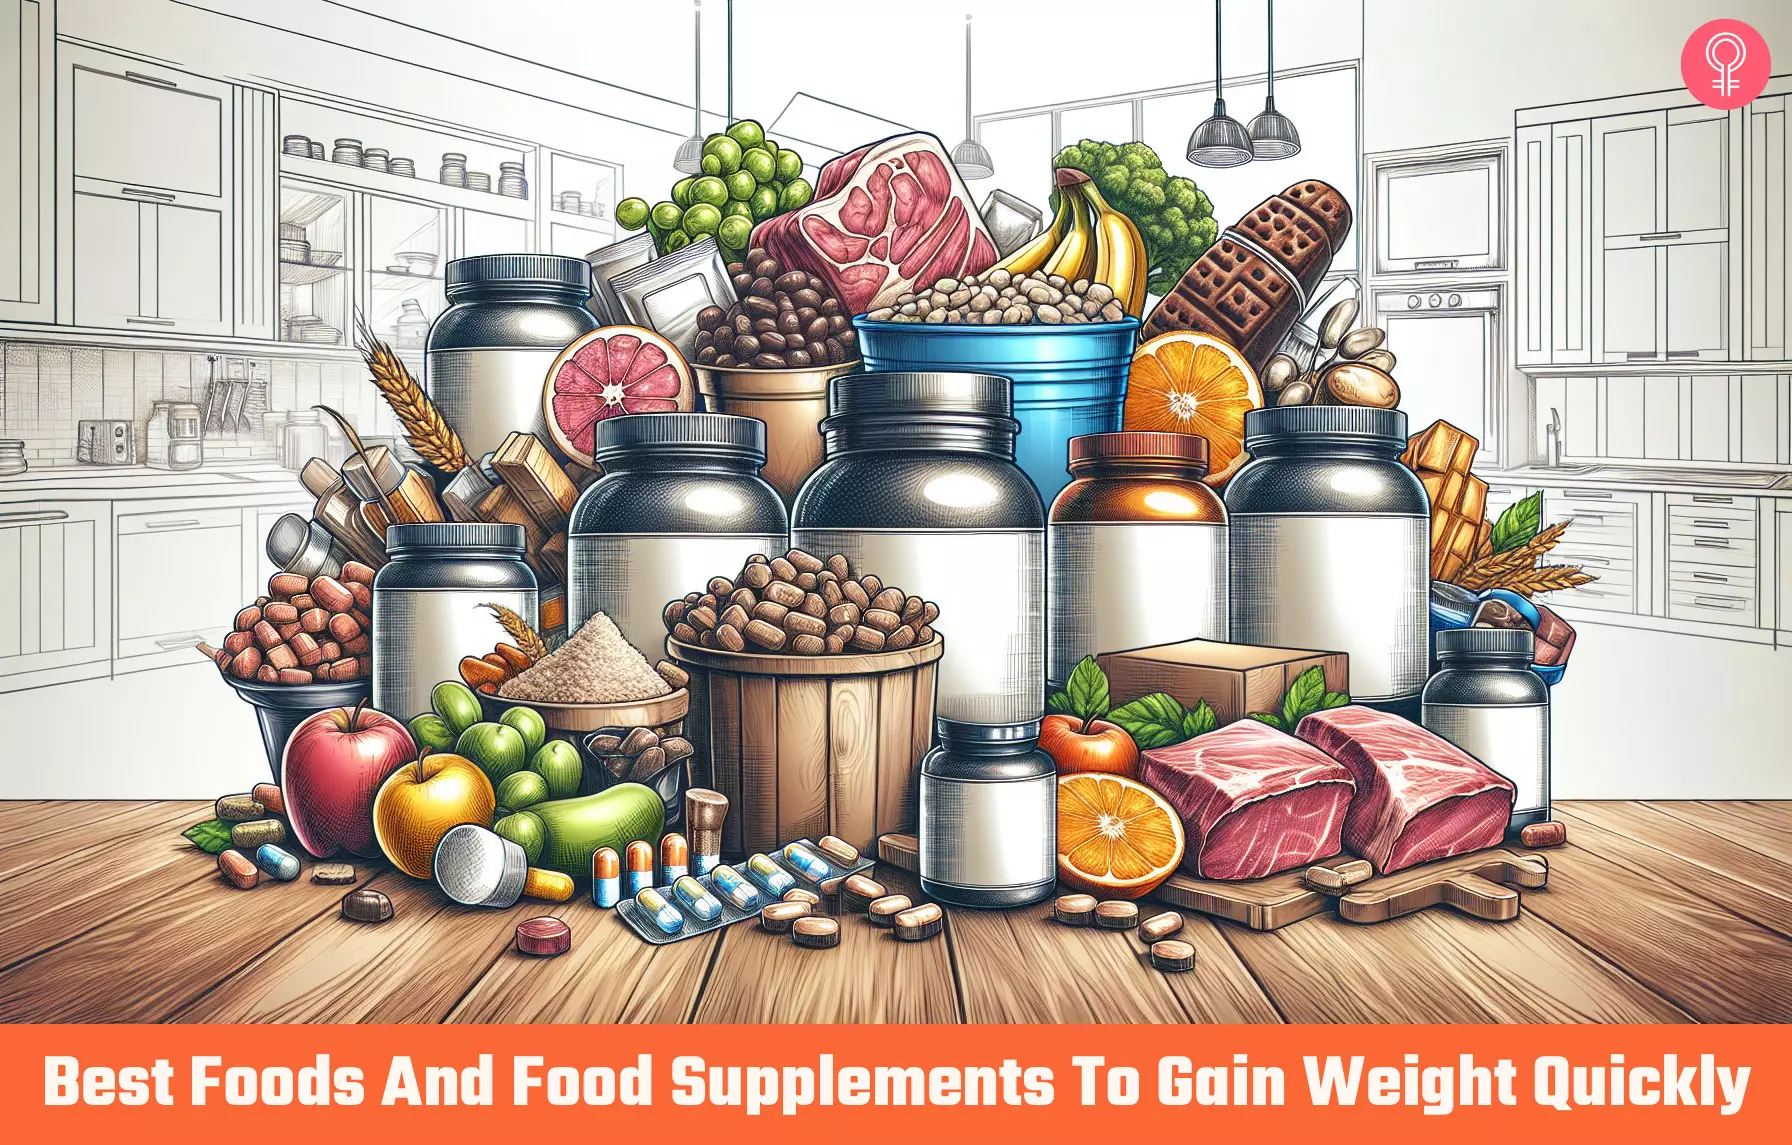 food supplements for weight gain_illustration